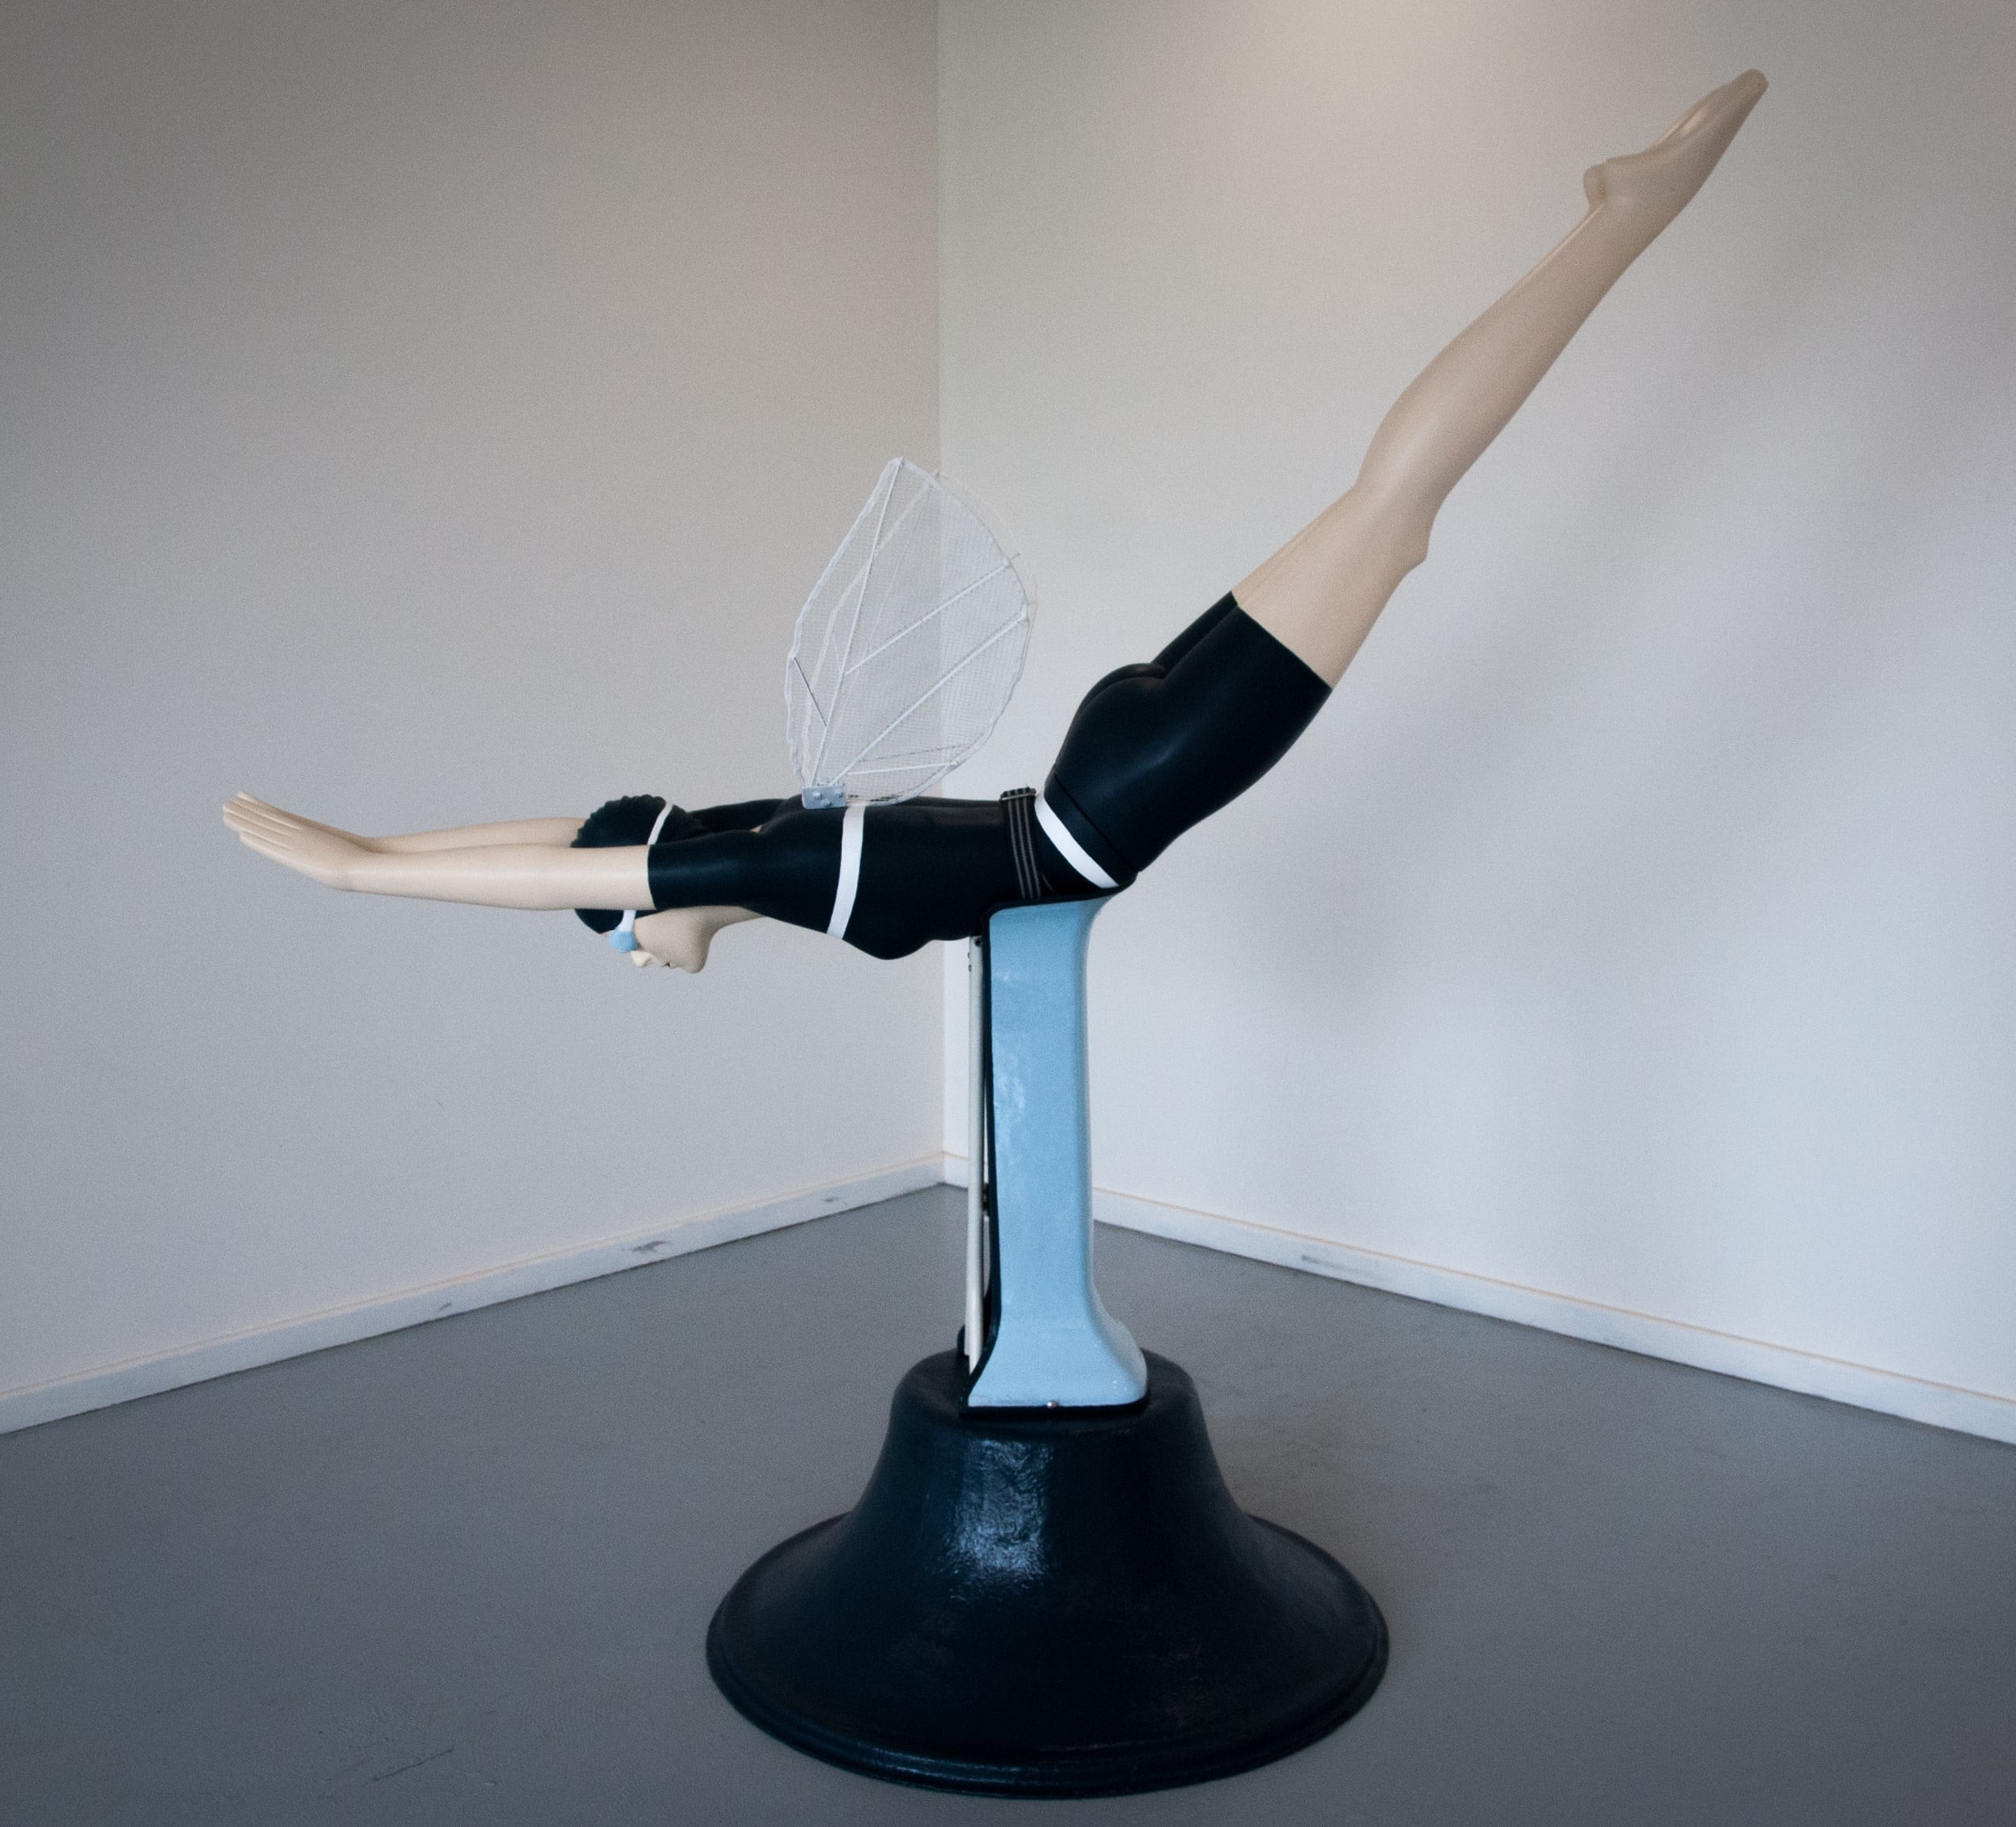 "Emancipation" object sculpture by Libby Bloxham, made of recycled/discarded materials. A life-sized woman in vintage swimwear is in a diving pose, with insect wings added to her back.